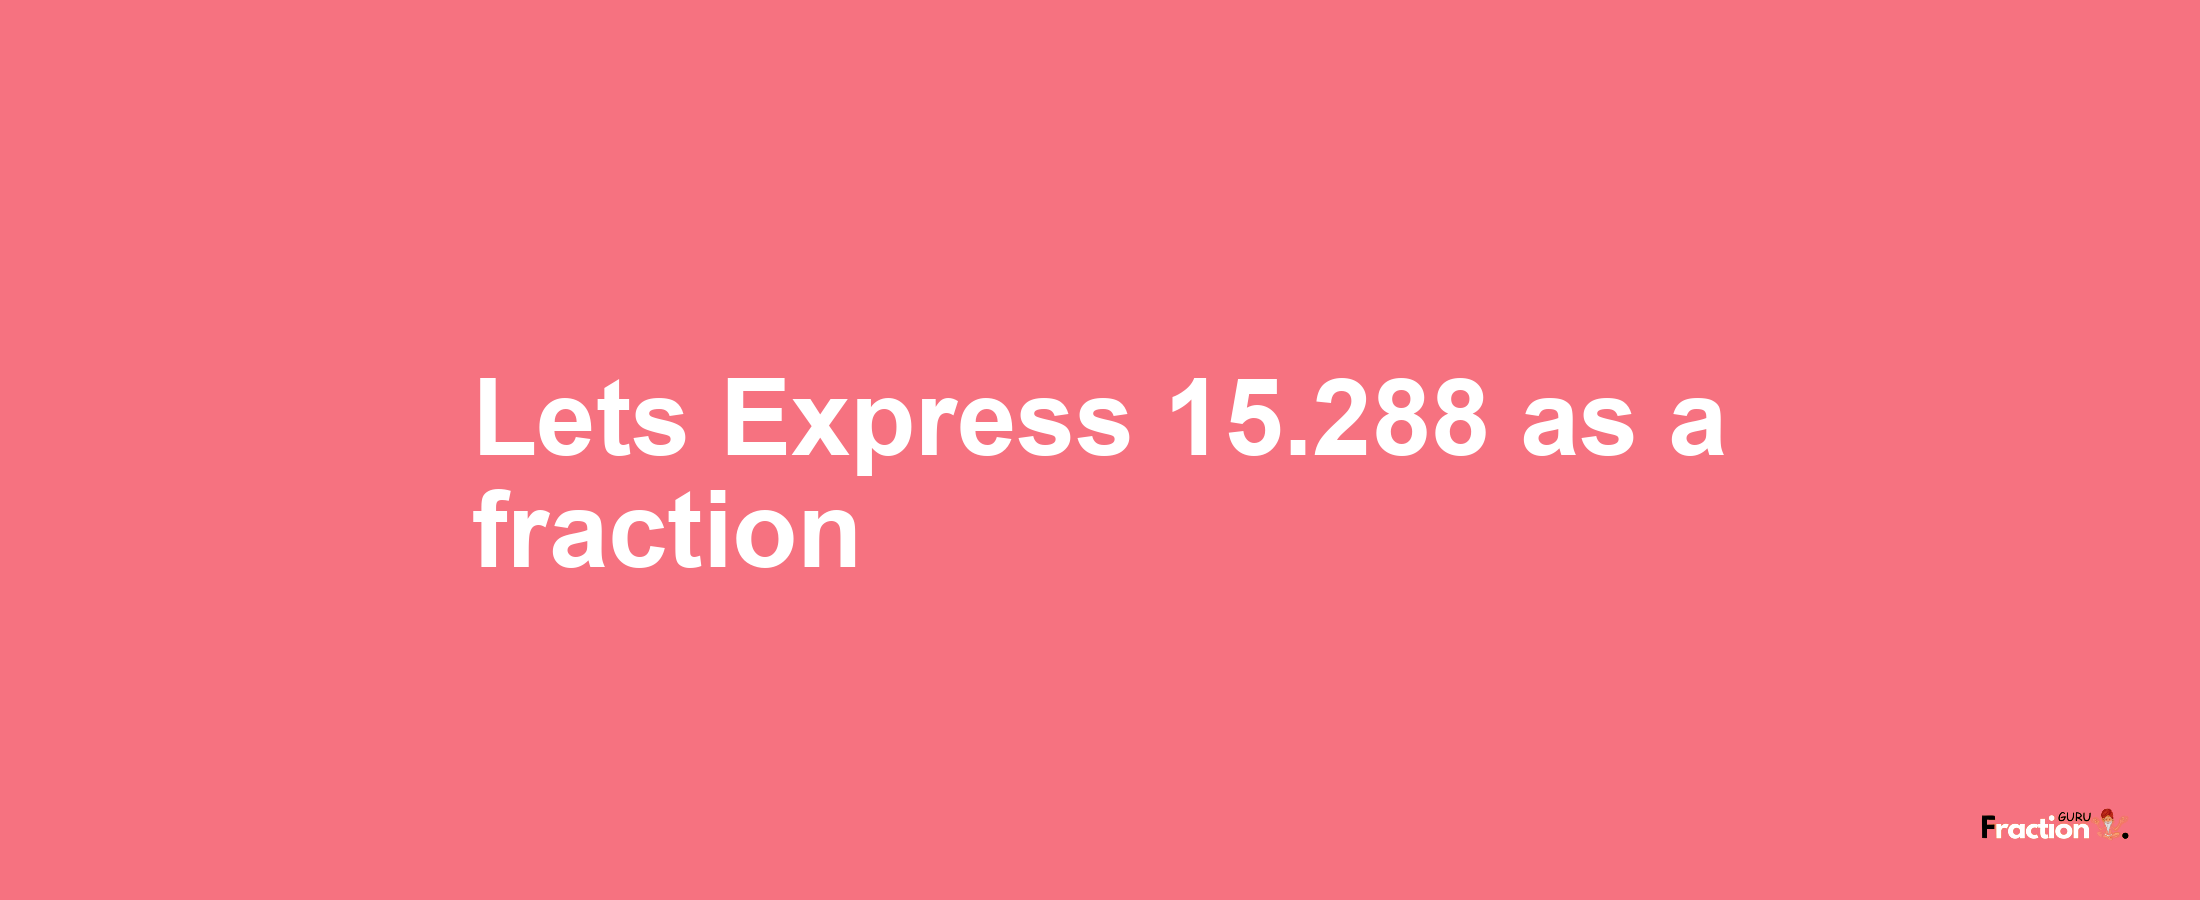 Lets Express 15.288 as afraction